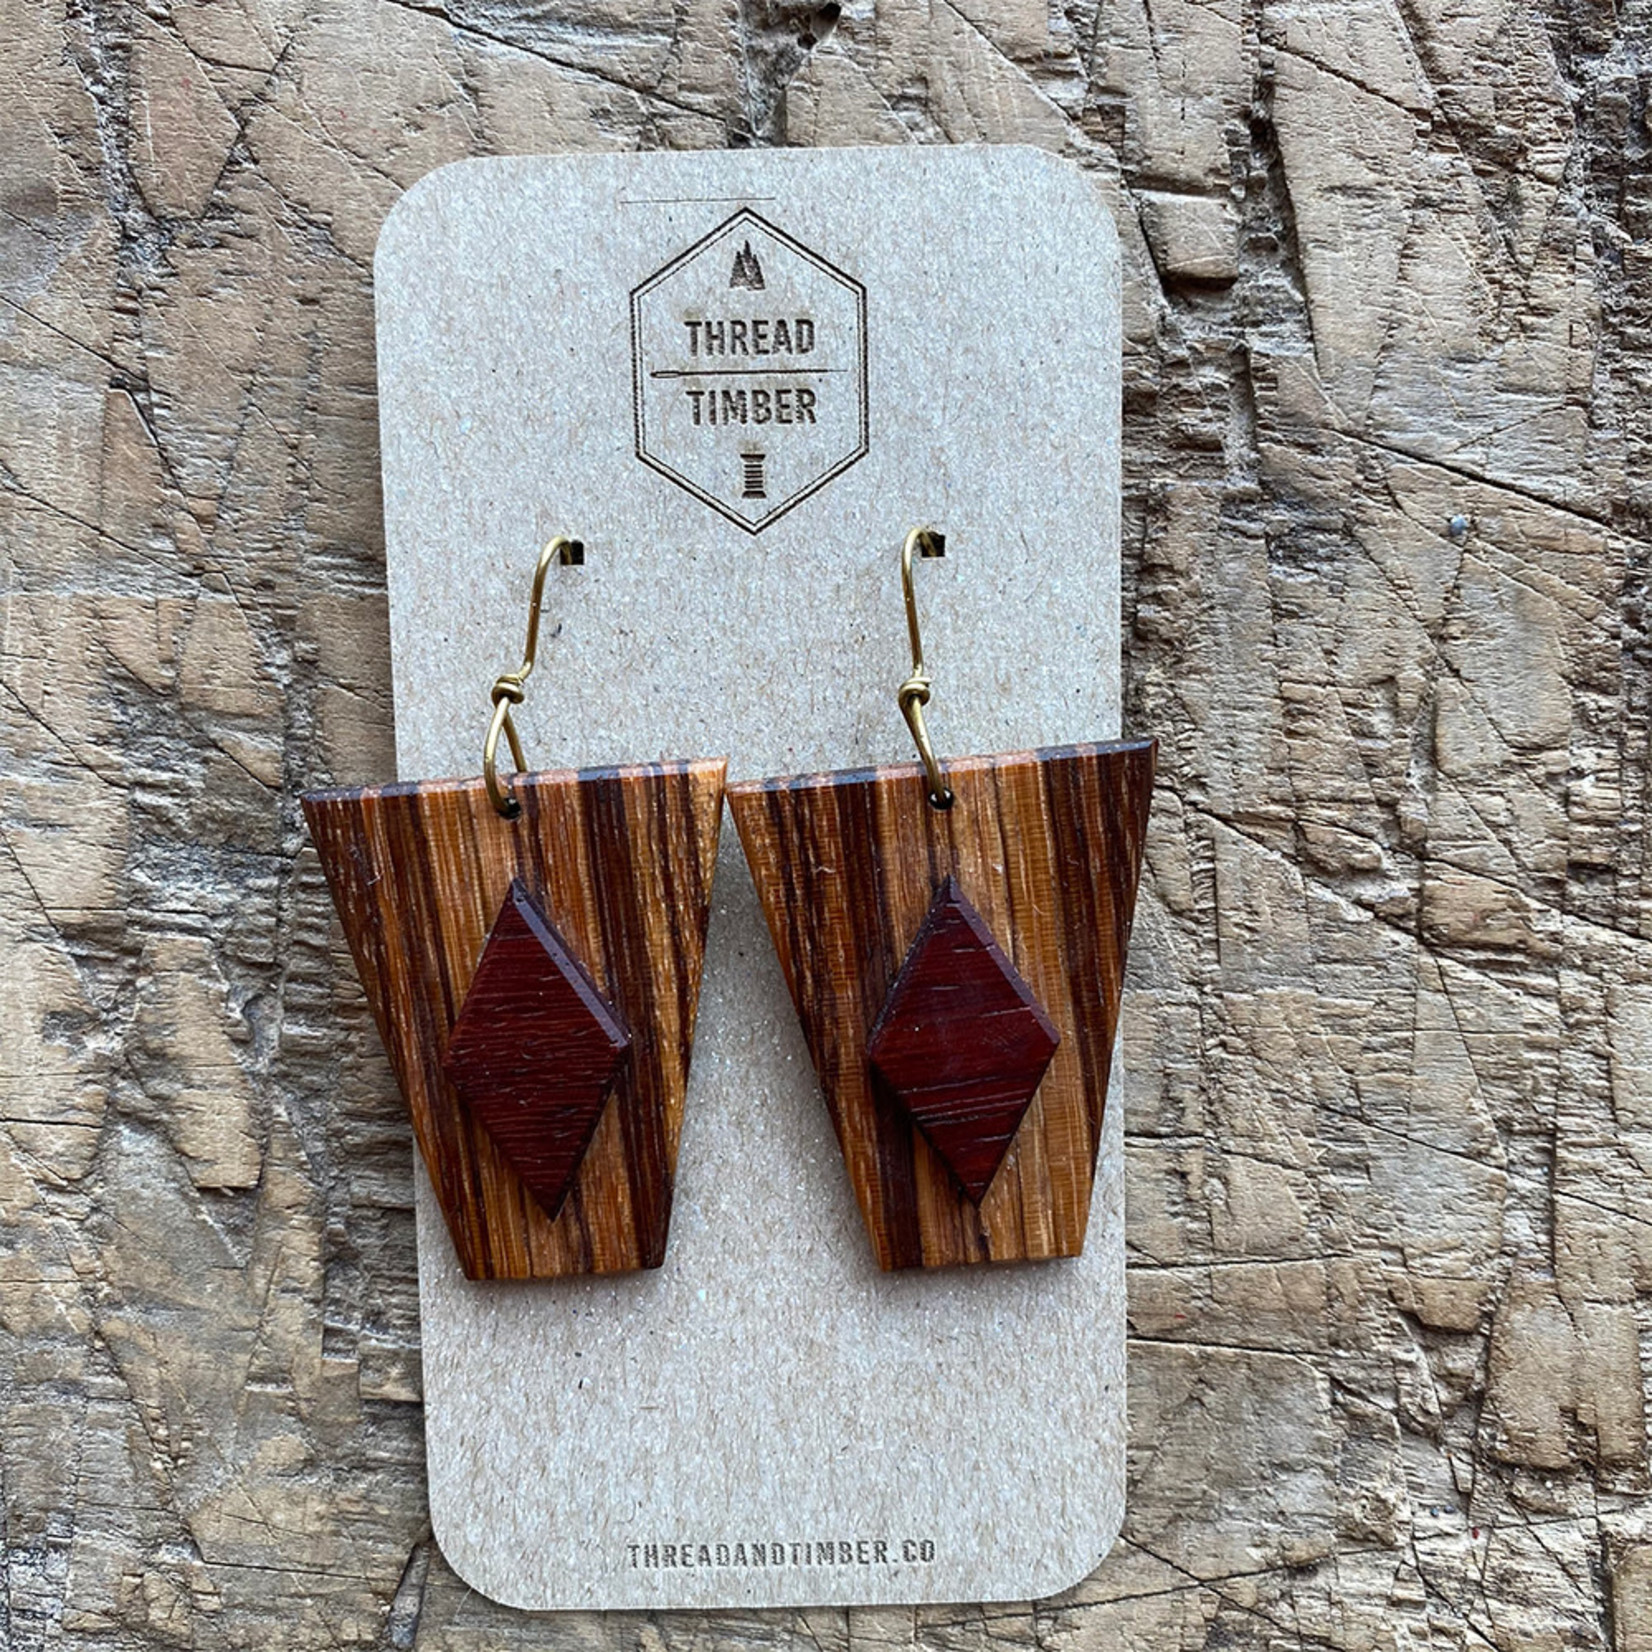 Red Ants Pants Thread + Timber Earrings